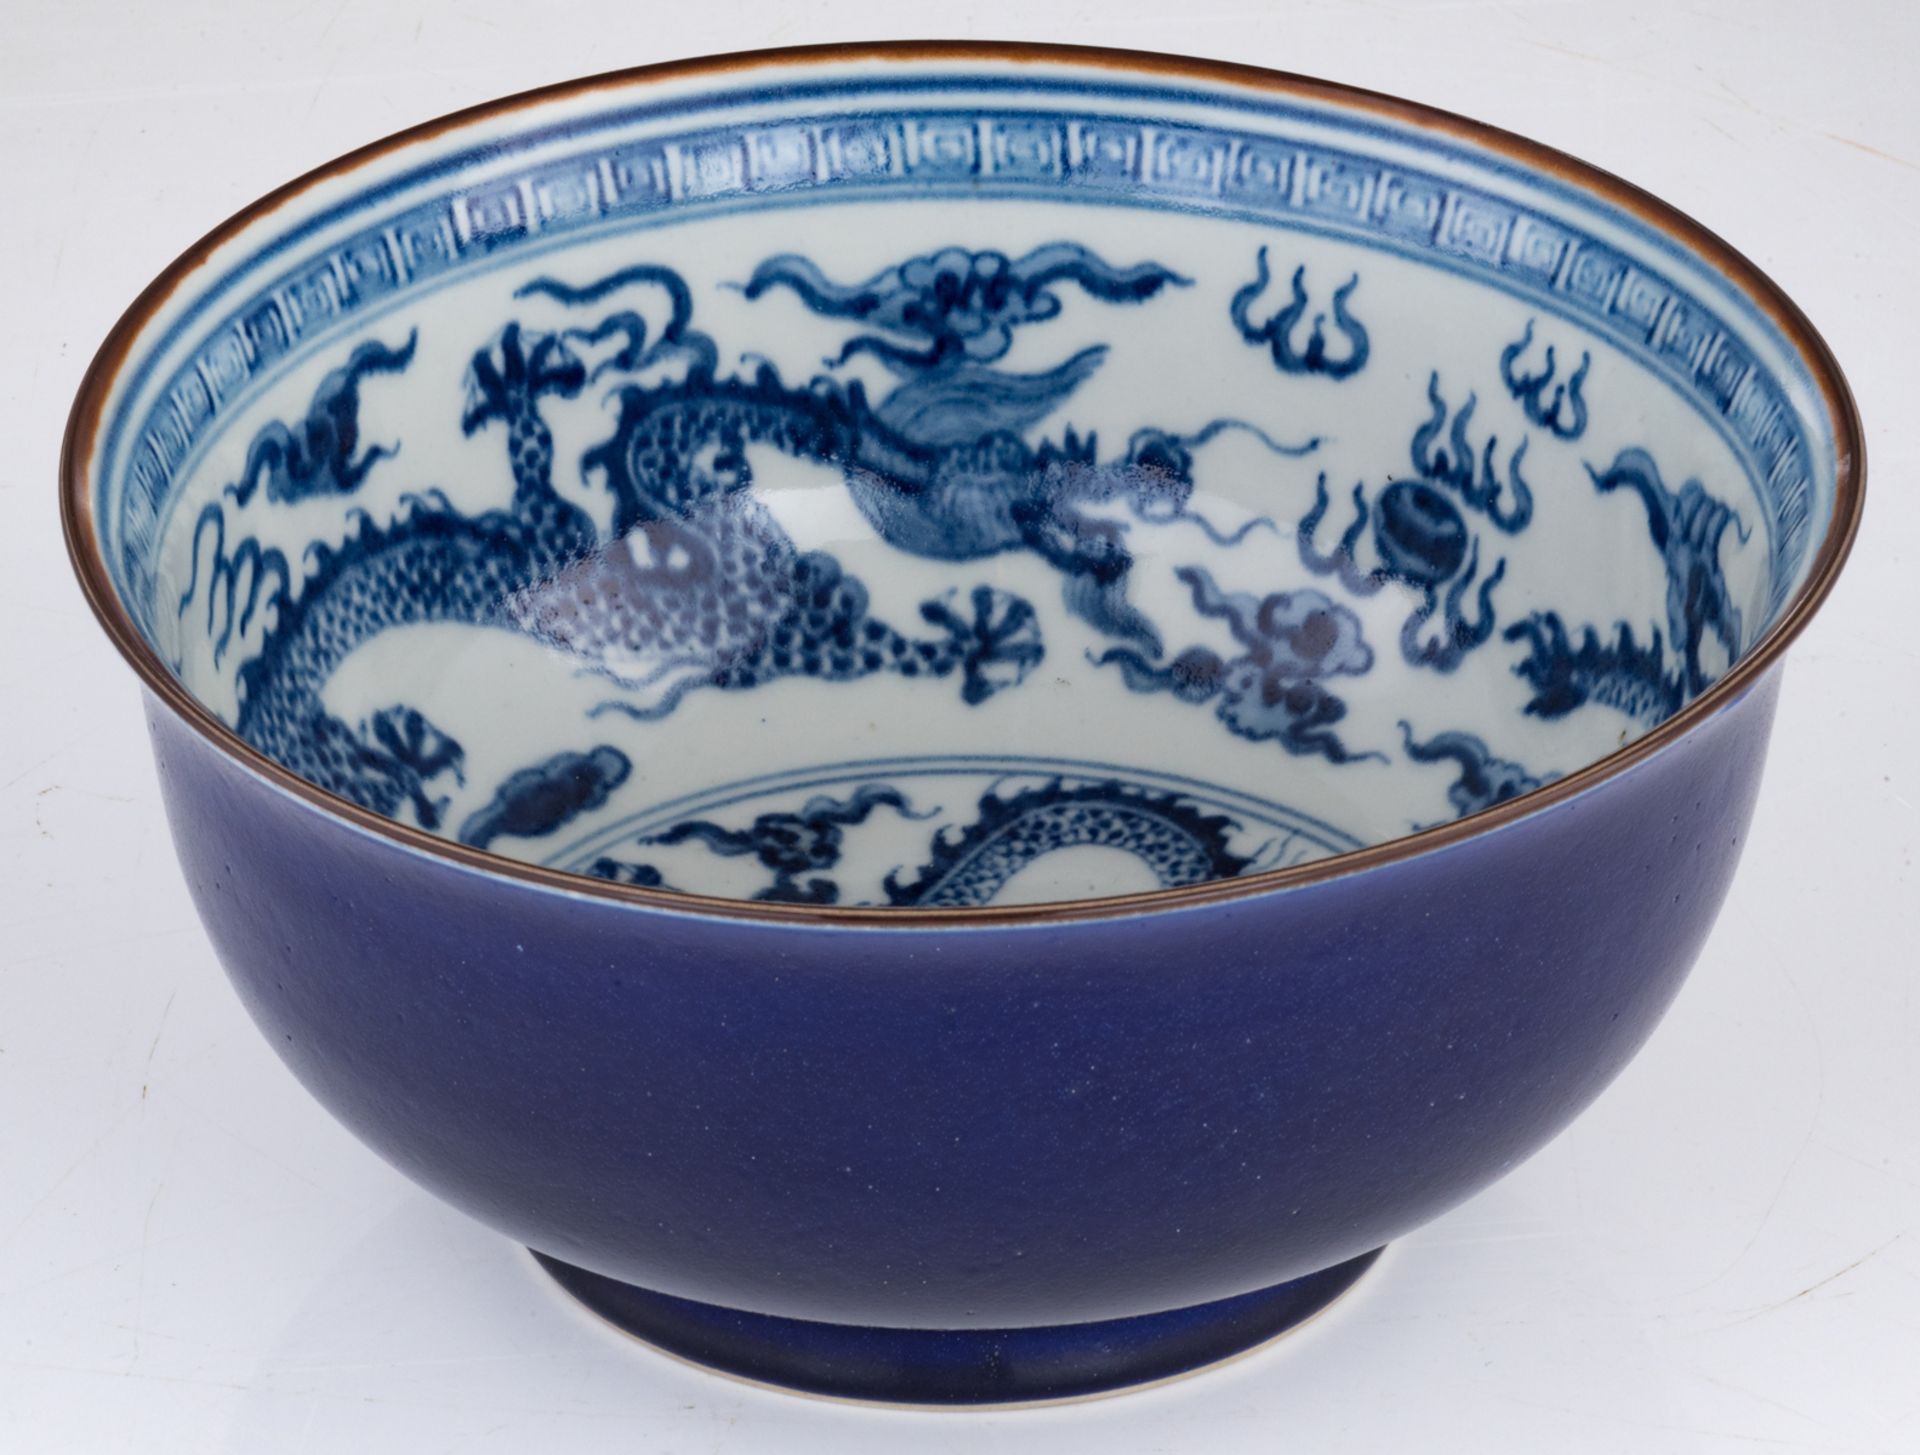 A Chinese blue and white deep bowl, decorated with dragons chasing the pearl, with a Xuande mark, la - Image 8 of 8